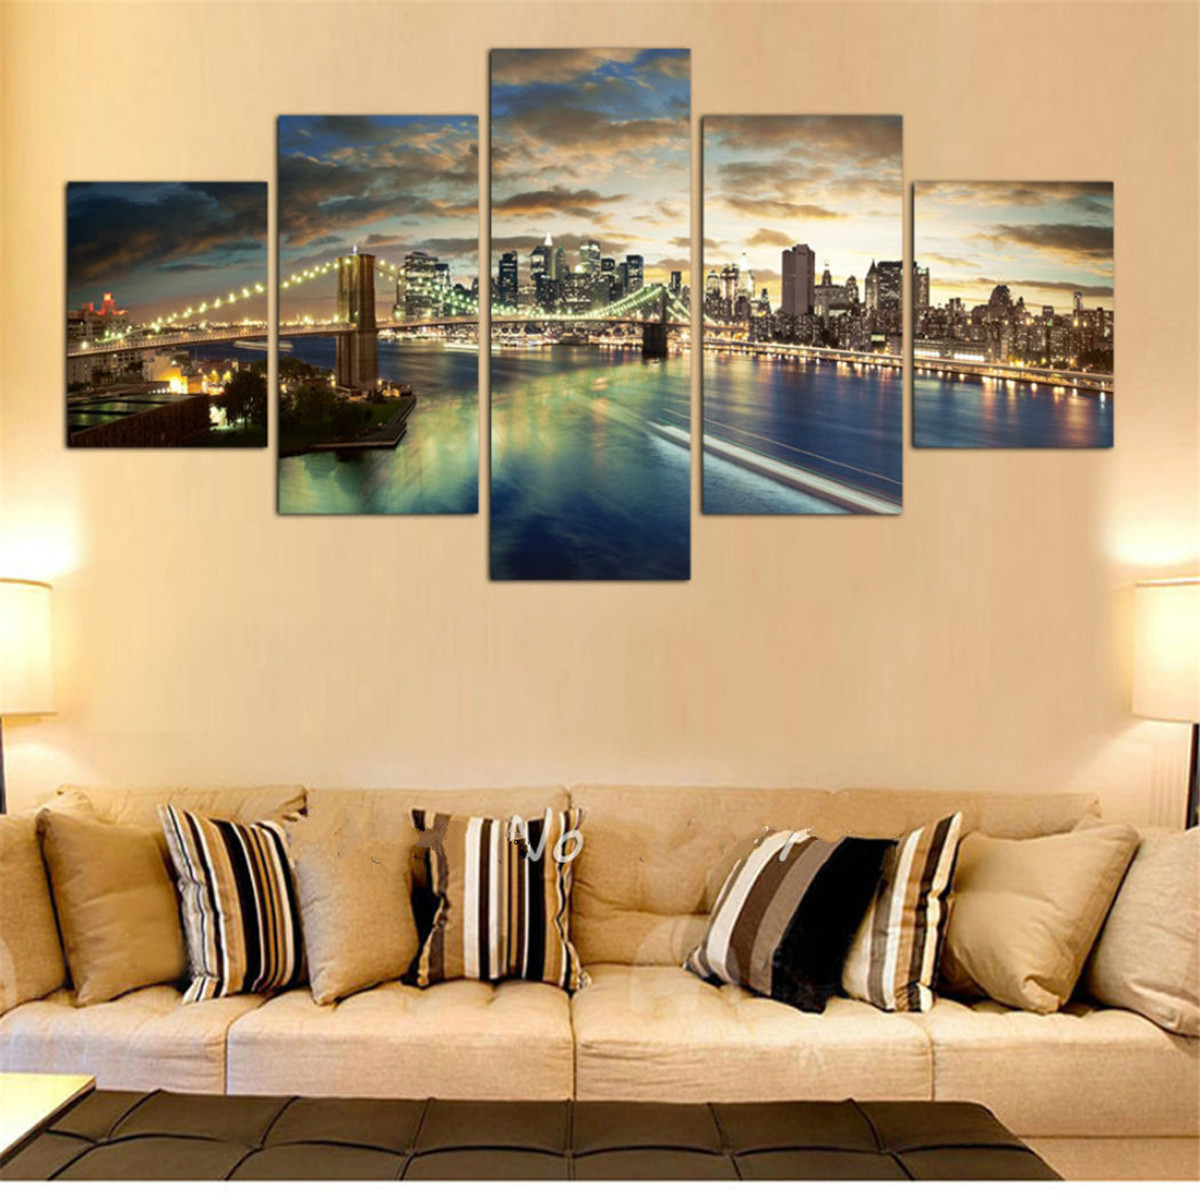 5-Pcs-Wall-Decorative-Painting-New-York-City-at-Night-Wall-Decor-Art-Pictures-Canvas-Prints-Home-Off-1724152-3